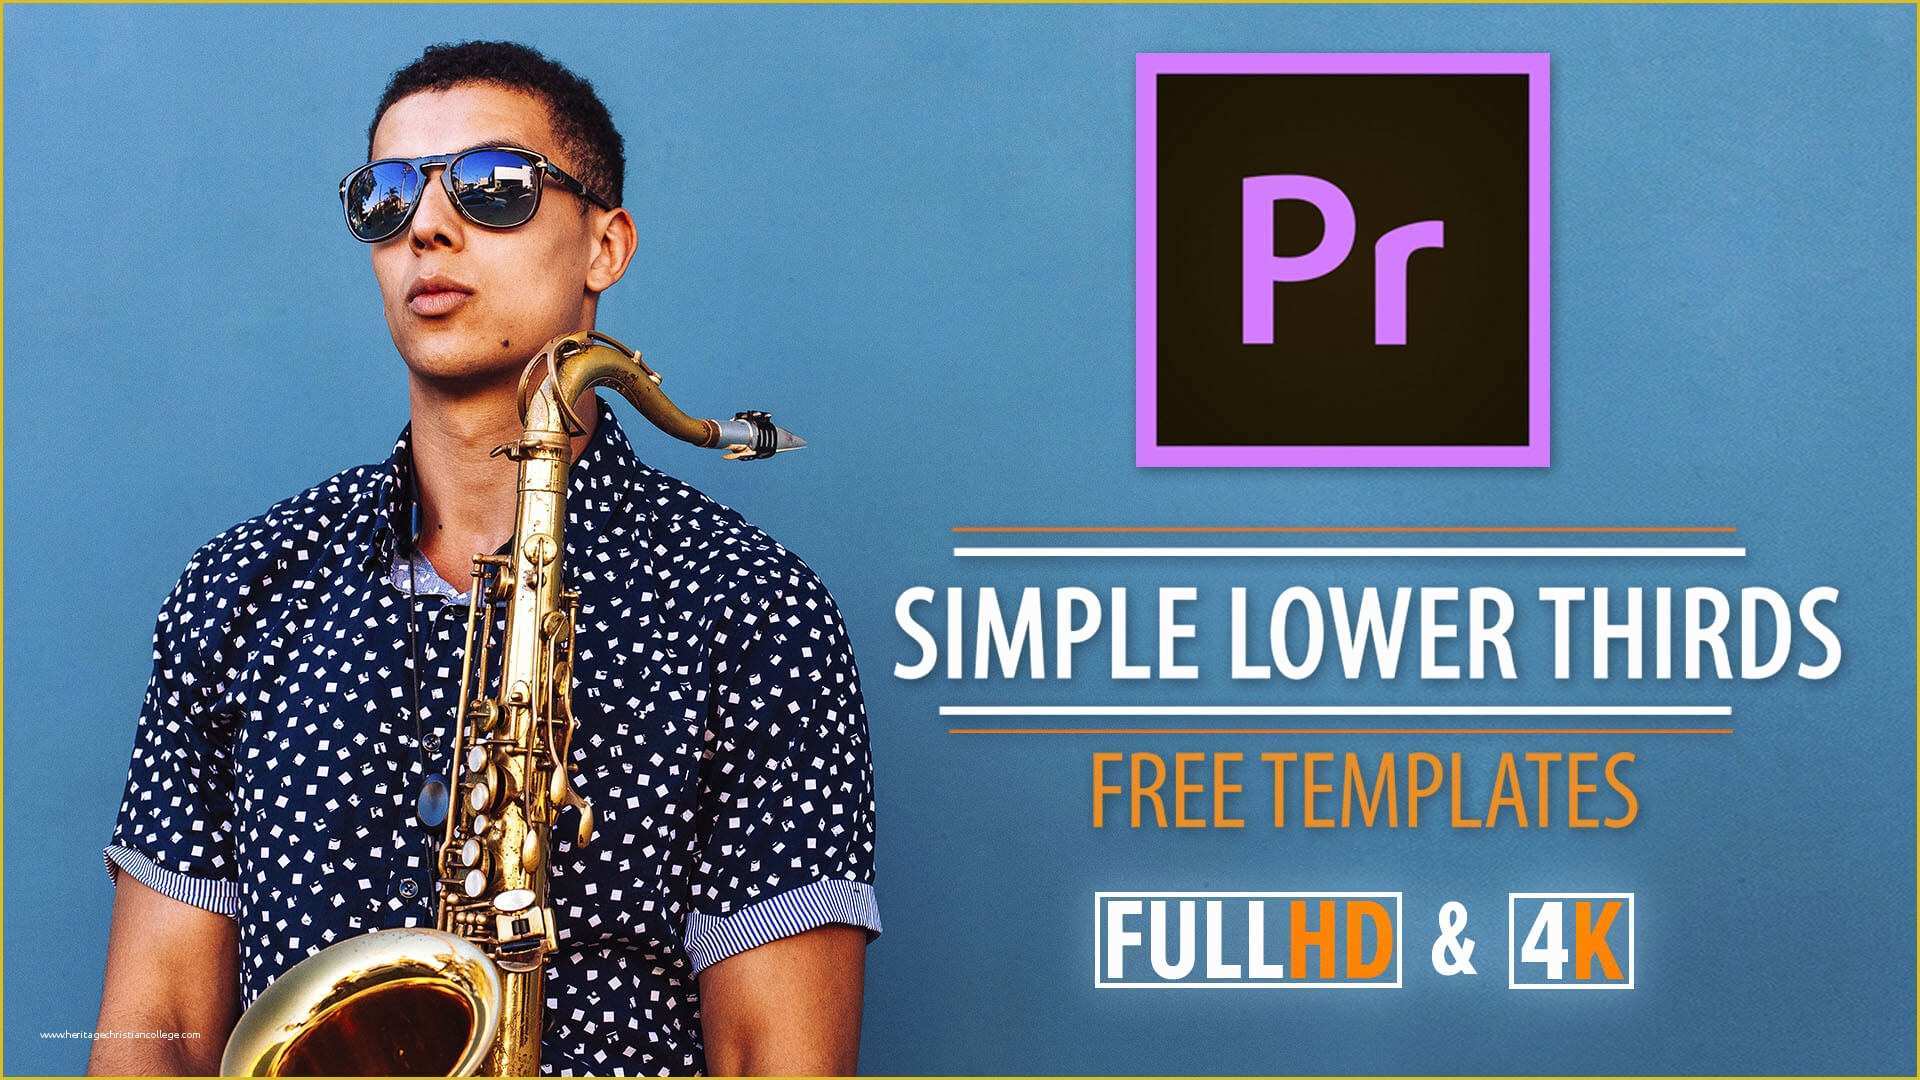 Adobe Premiere Pro Templates Free Of Simple Lower Thirds Templates for Premiere Pro